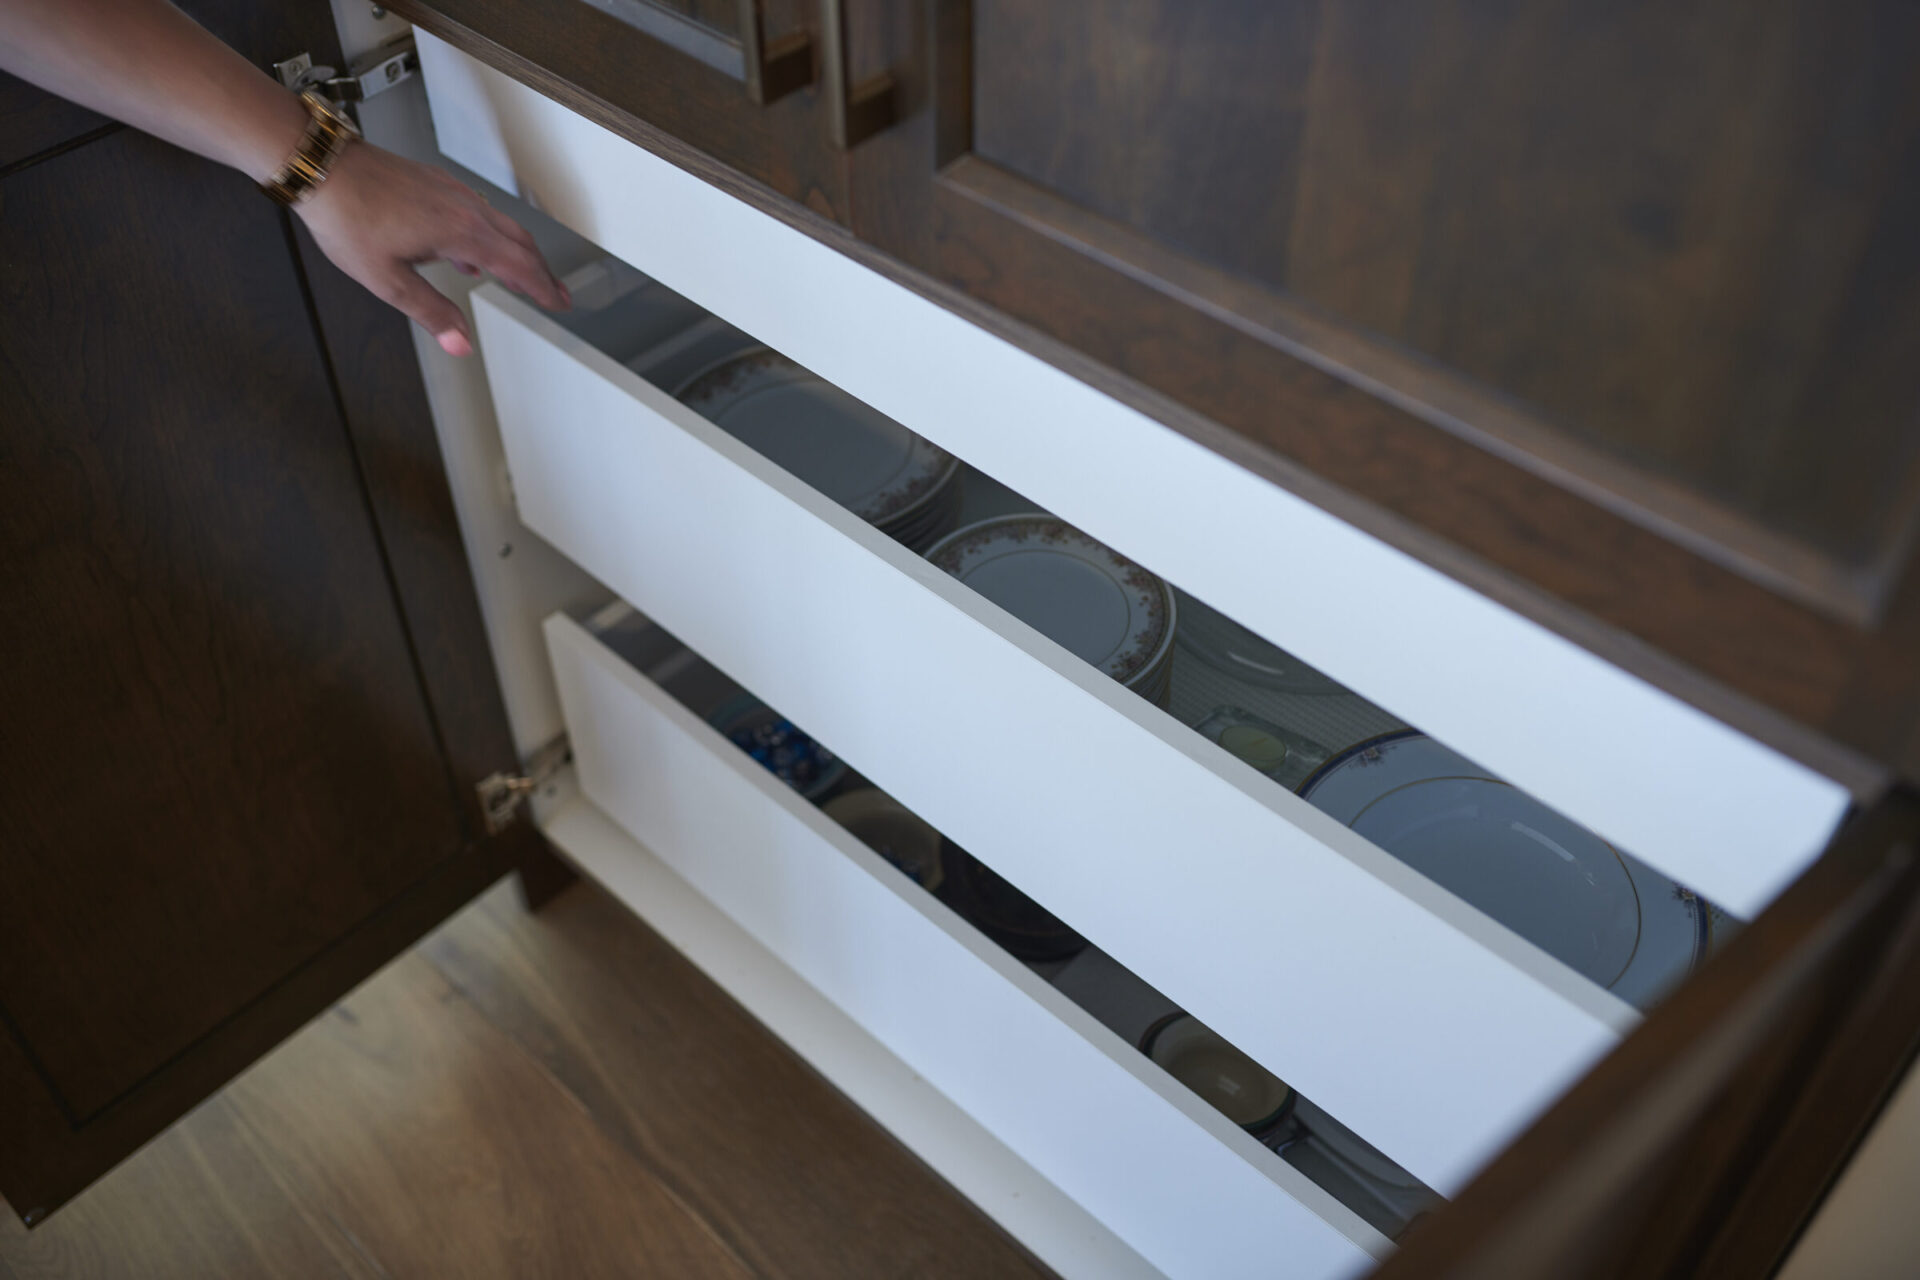 A person is opening a modern, dark wood finish cabinet drawer containing neatly arranged plates. The focus is on the drawer's contents and the person's hand.